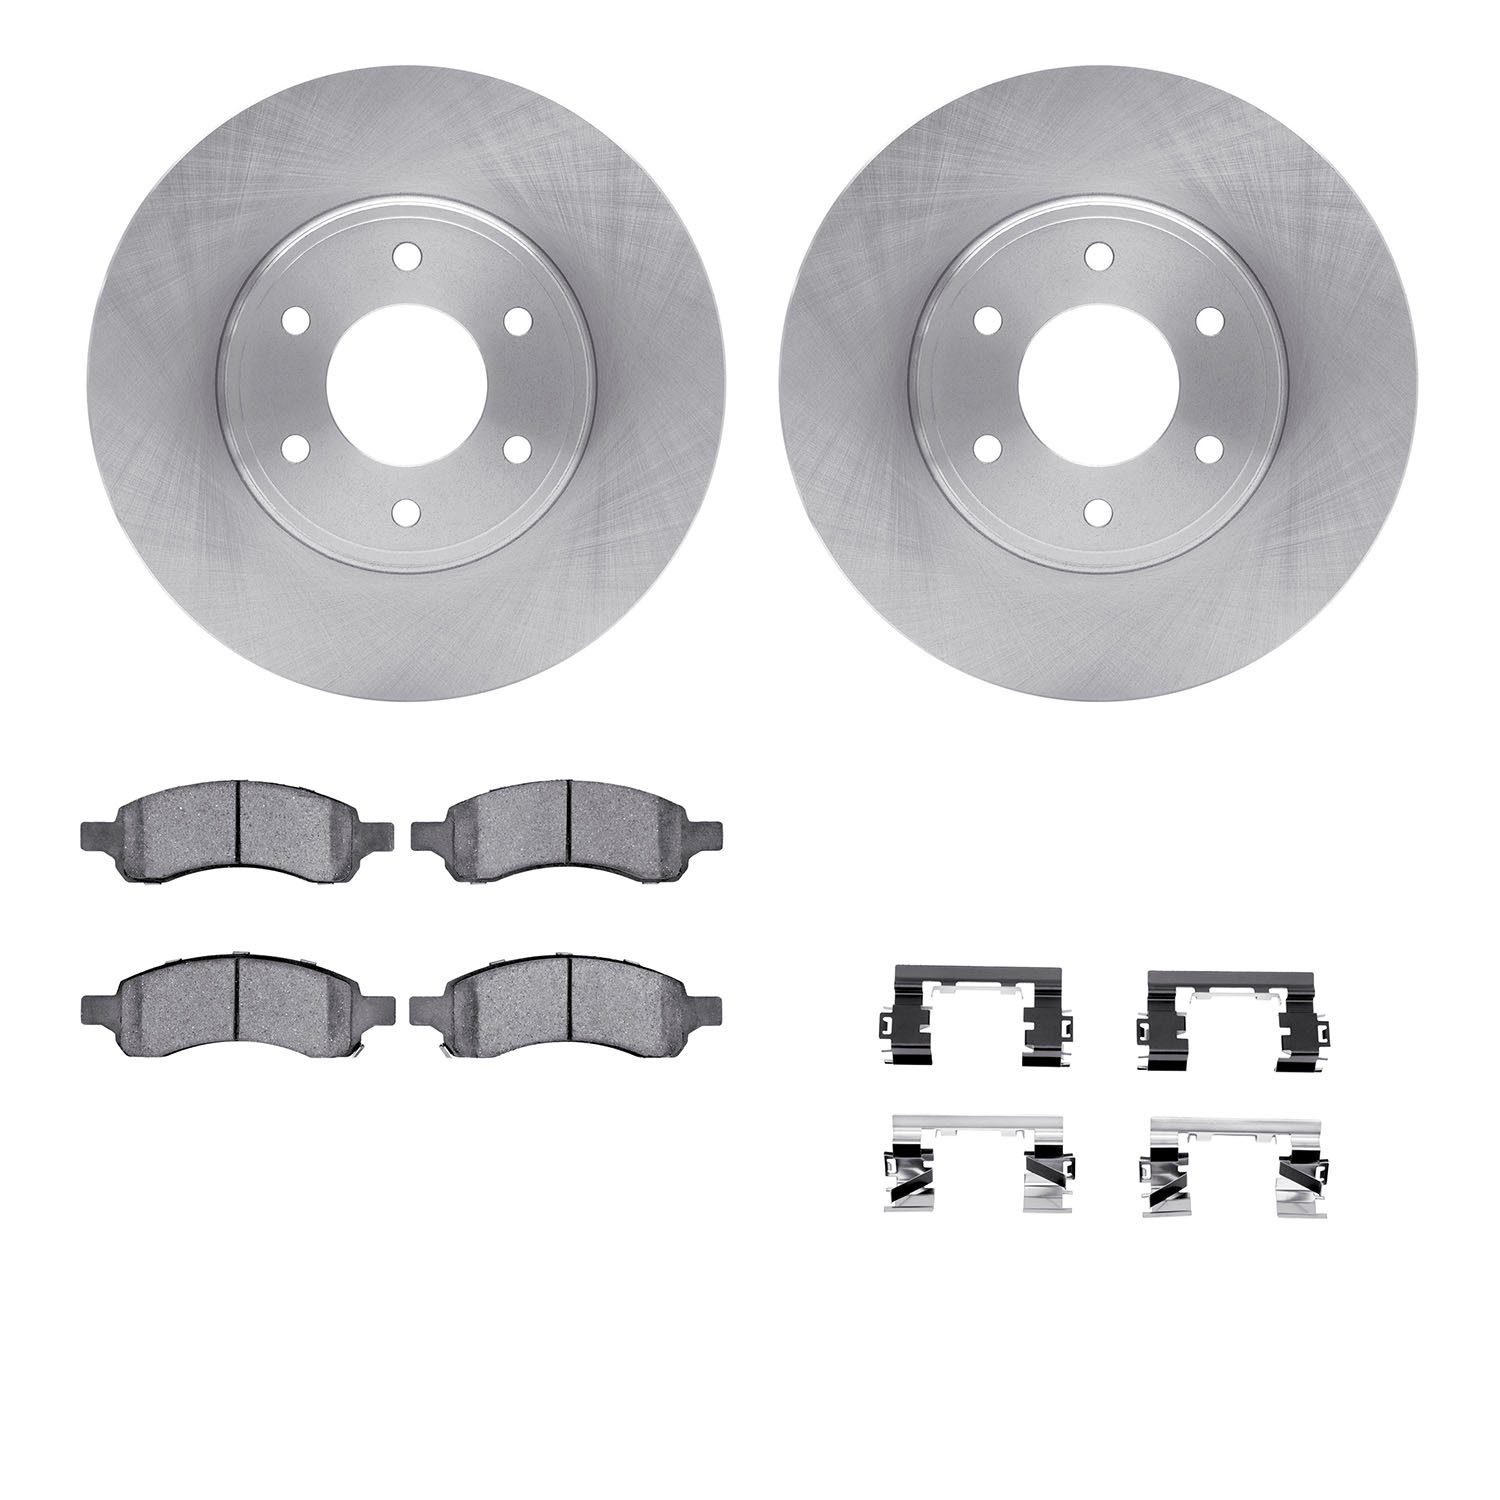 6412-47040 Brake Rotors with Ultimate-Duty Brake Pads Kit & Hardware, 2006-2009 GM, Position: Front